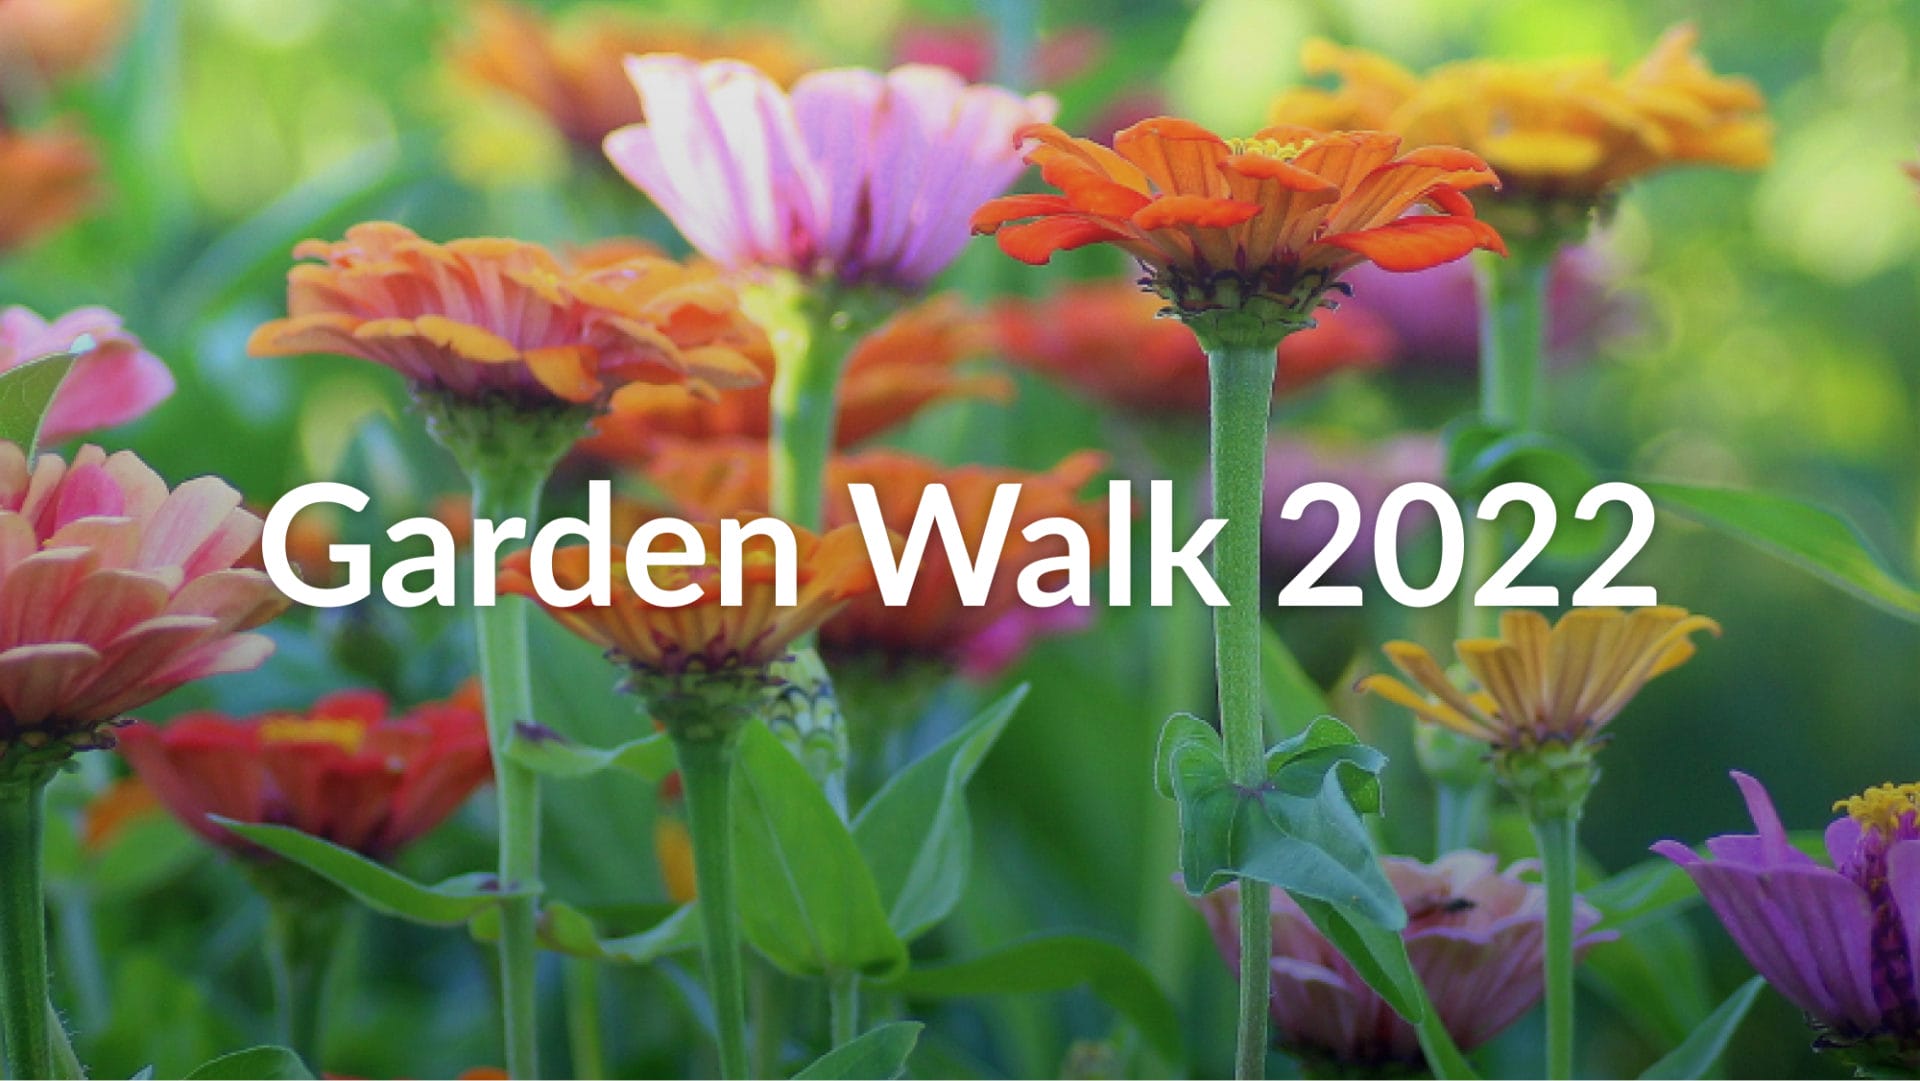 image of flowers and text overlay reading "Garden Walk 2022"